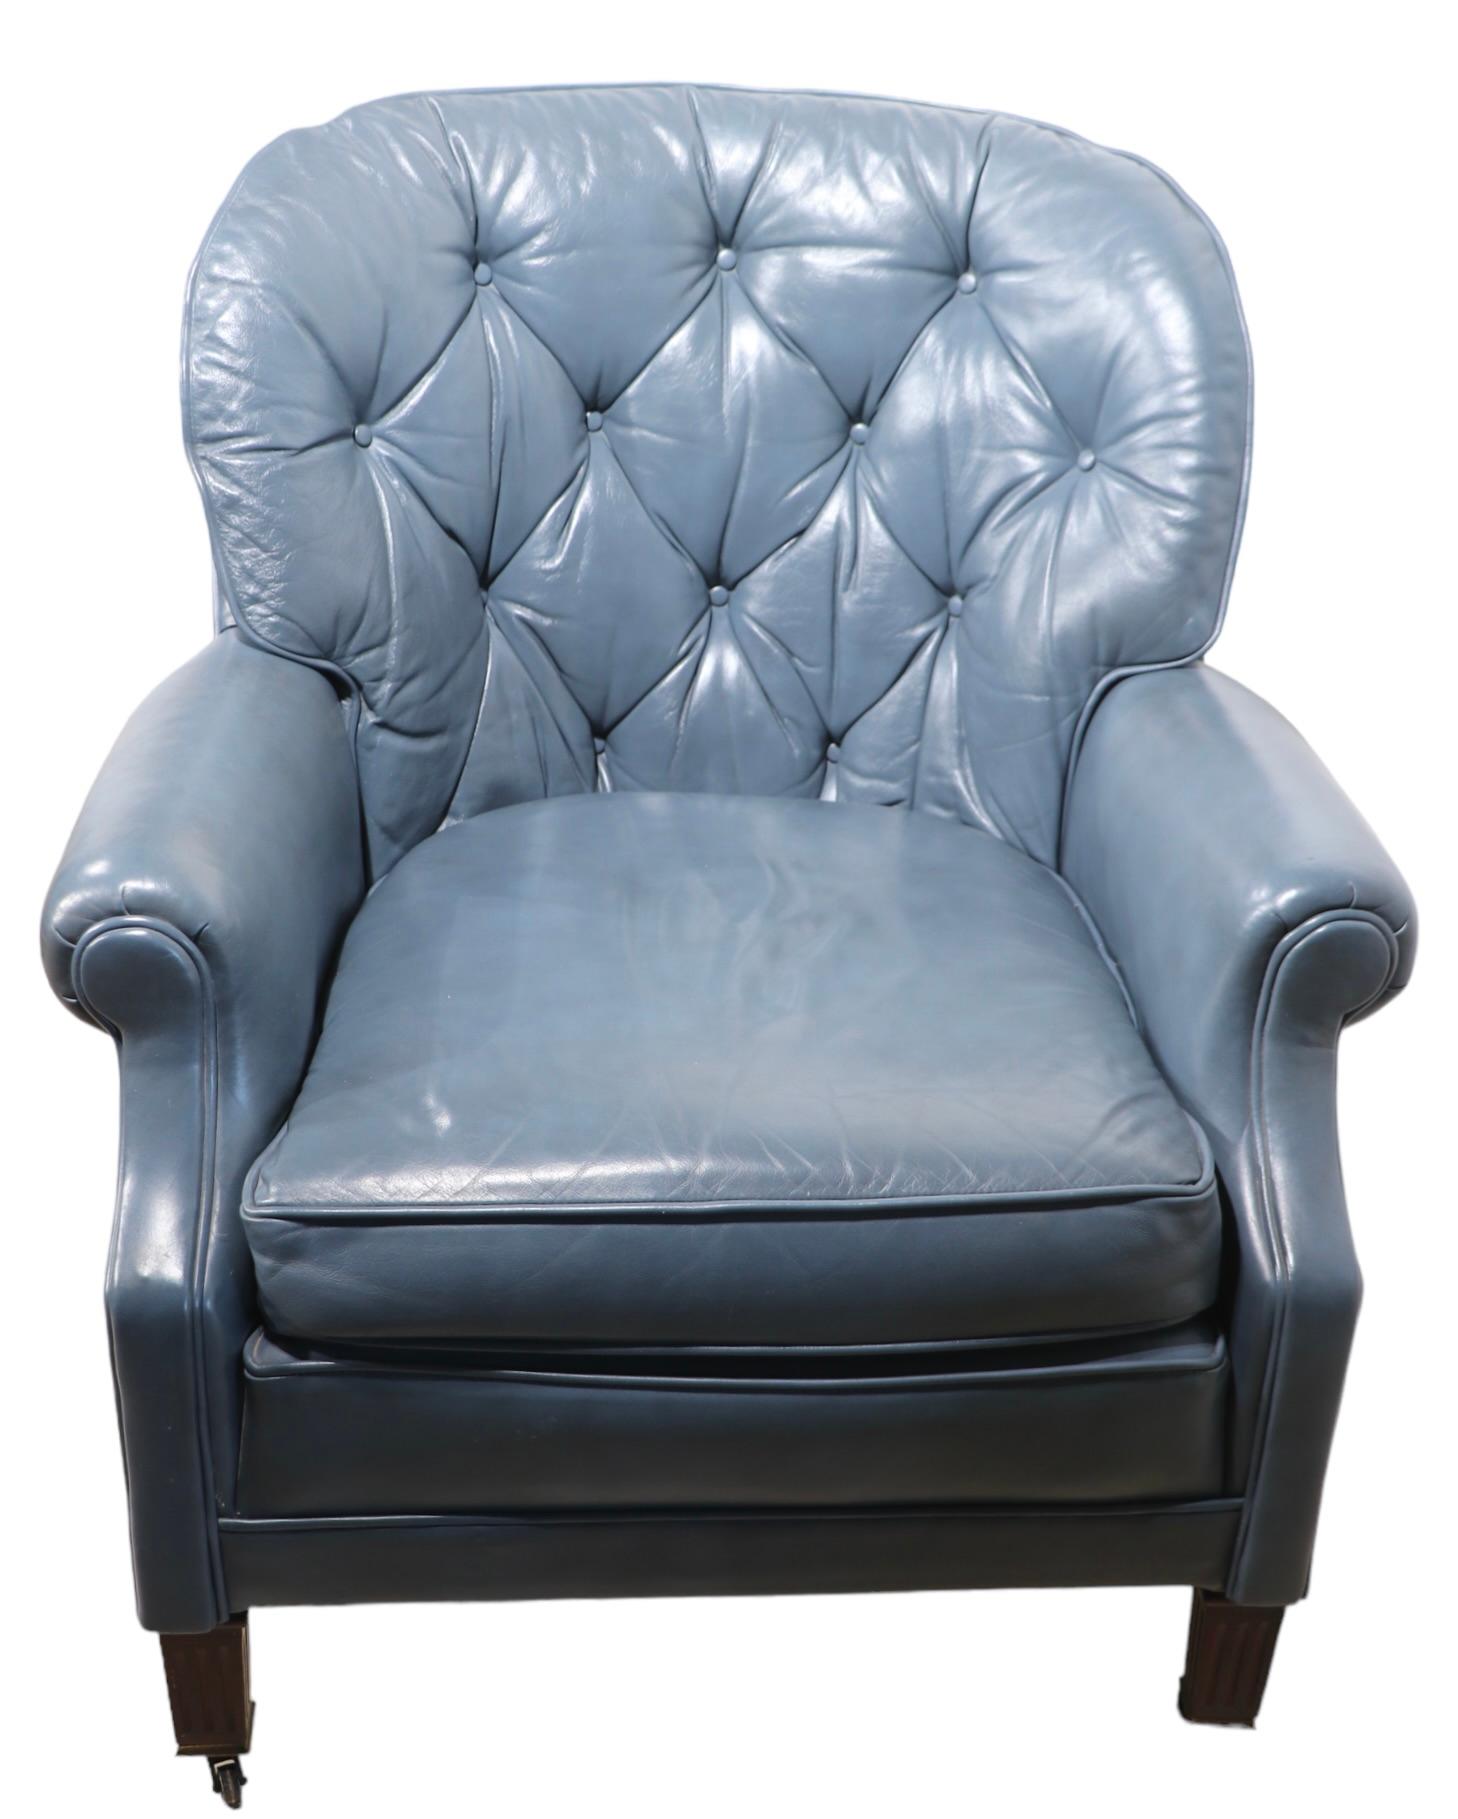 Lounge Chair and Ottoman in  Blue Leather  by Classic  8